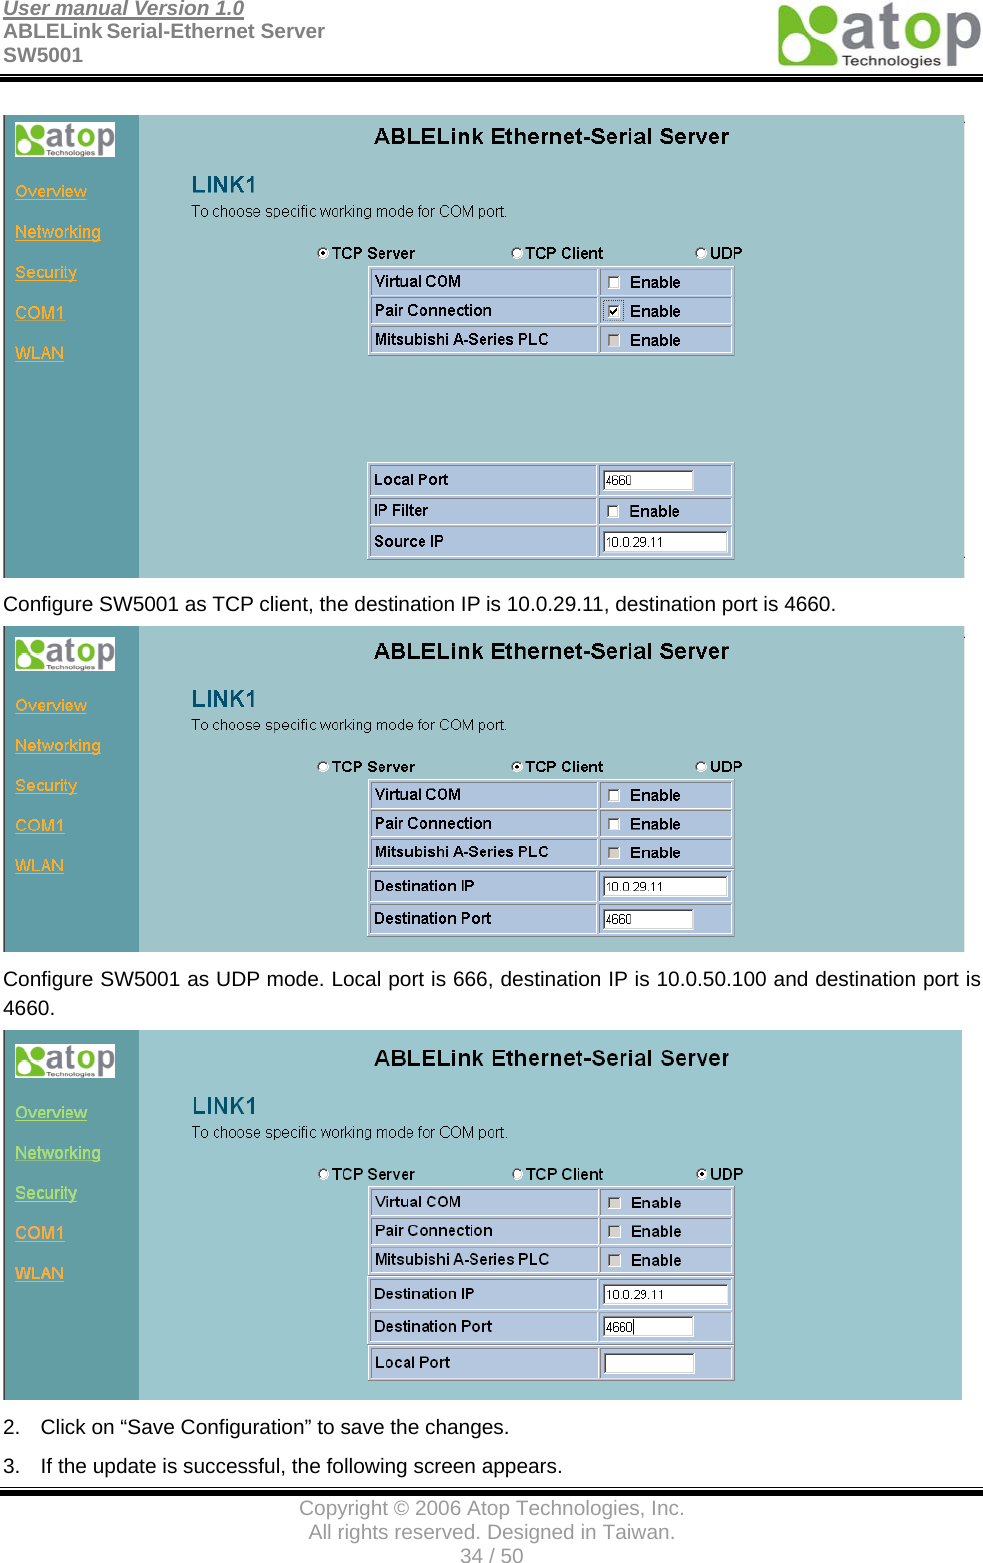 User manual Version 1.0 ABLELink Serial-Ethernet Server   SW5001                                        Copyright © 2006 Atop Technologies, Inc. All rights reserved. Designed in Taiwan. 34 / 50    Configure SW5001 as TCP client, the destination IP is 10.0.29.11, destination port is 4660.  Configure SW5001 as UDP mode. Local port is 666, destination IP is 10.0.50.100 and destination port is 4660.  2.  Click on “Save Configuration” to save the changes. 3.  If the update is successful, the following screen appears. 